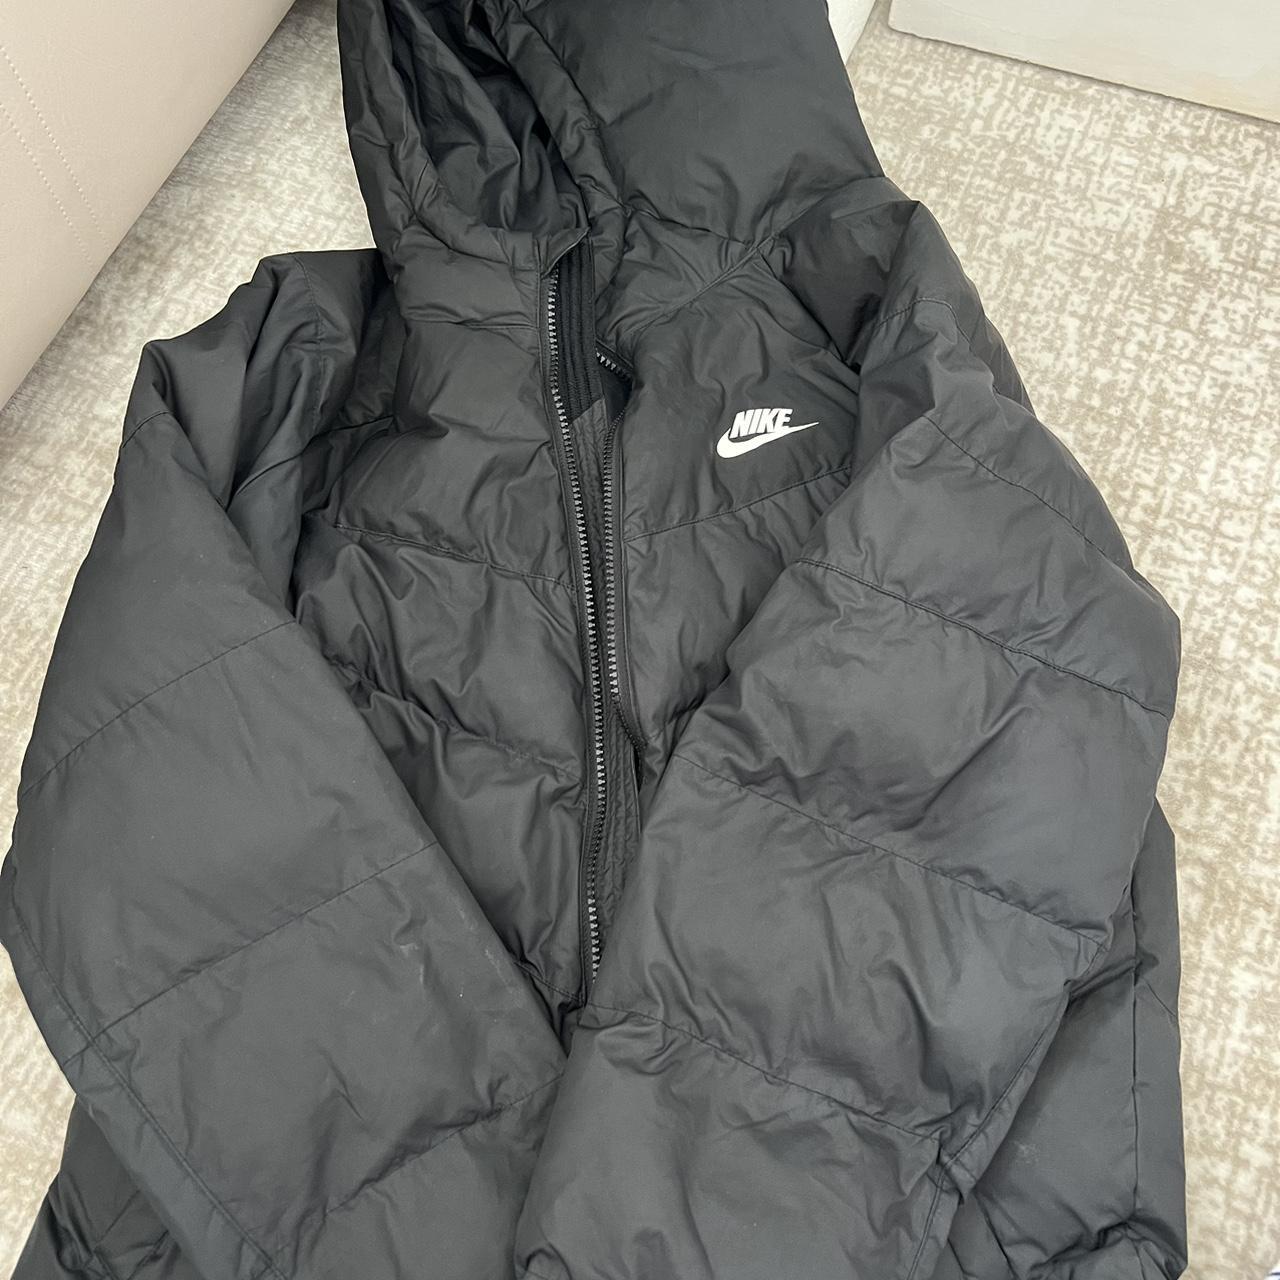 New only worn once Nike puffer jacket small Kids xl - Depop